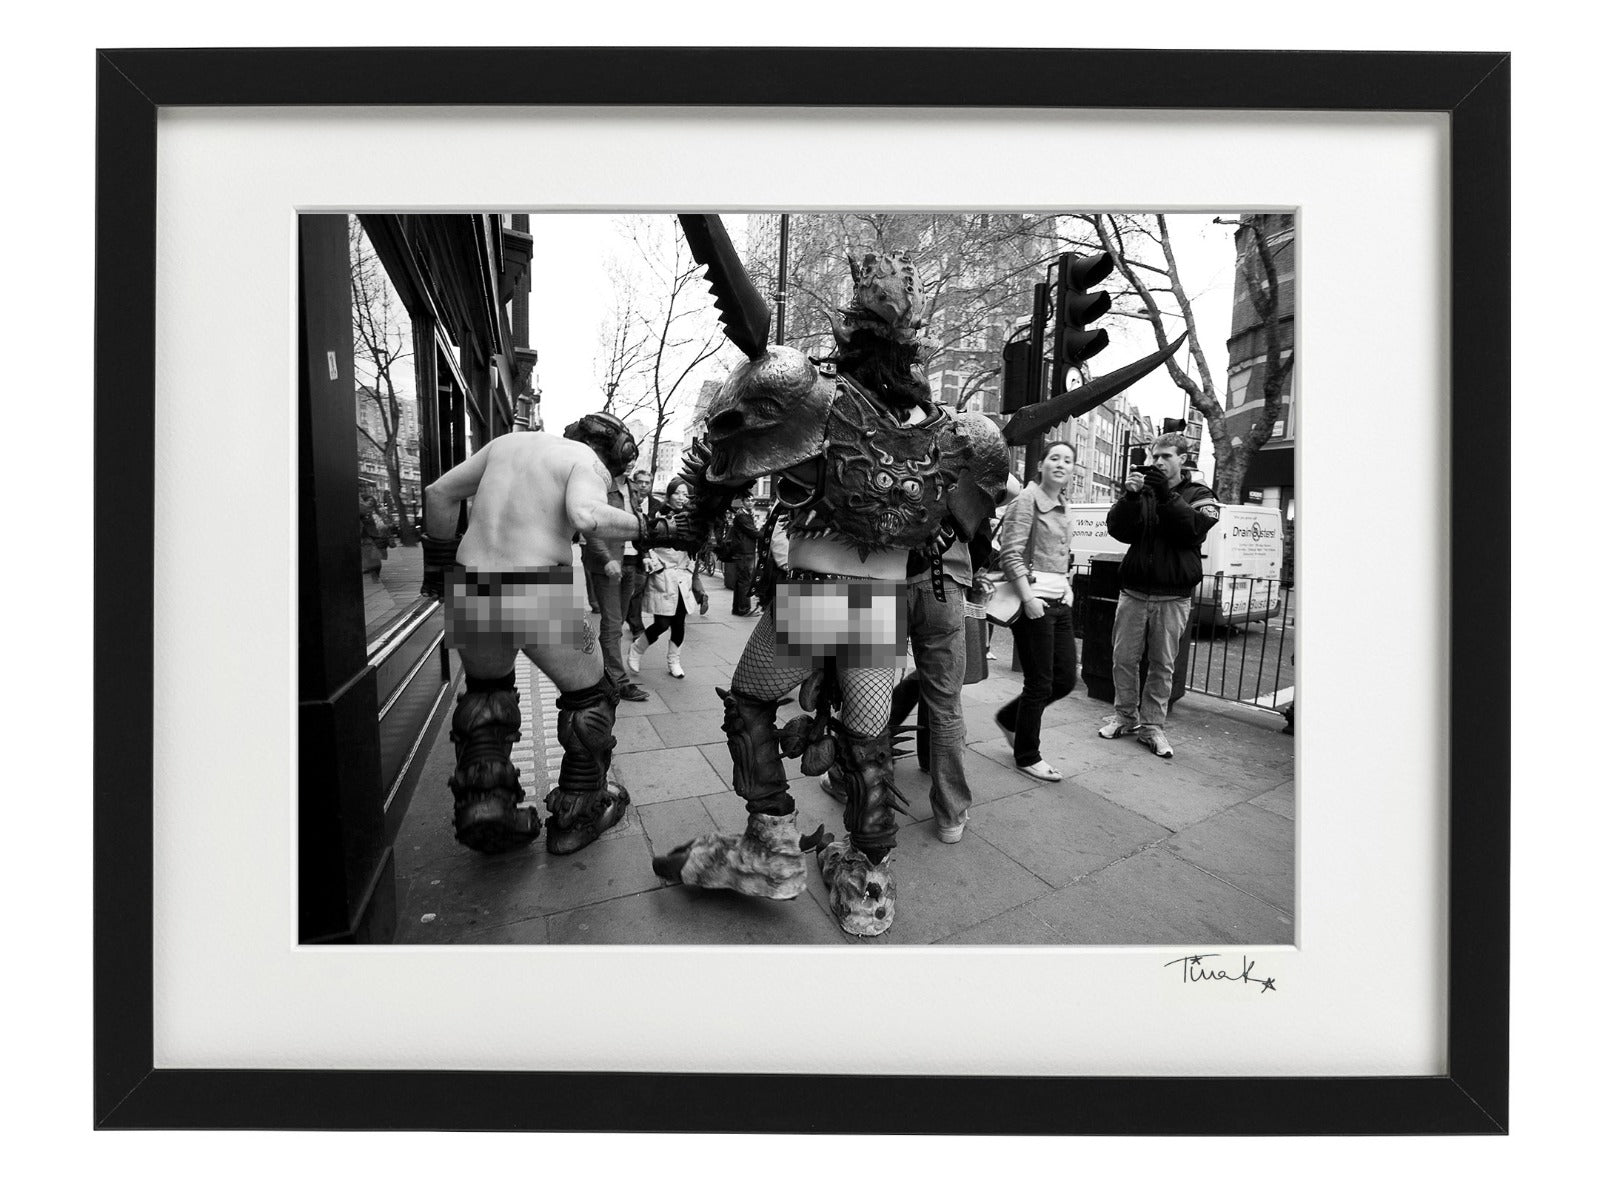 Oderus Urungus from GWAR making his way back to Astoria from Crobar in London in 2007 with onlookers staring. Black and white framed print signed by Tina K Photography.